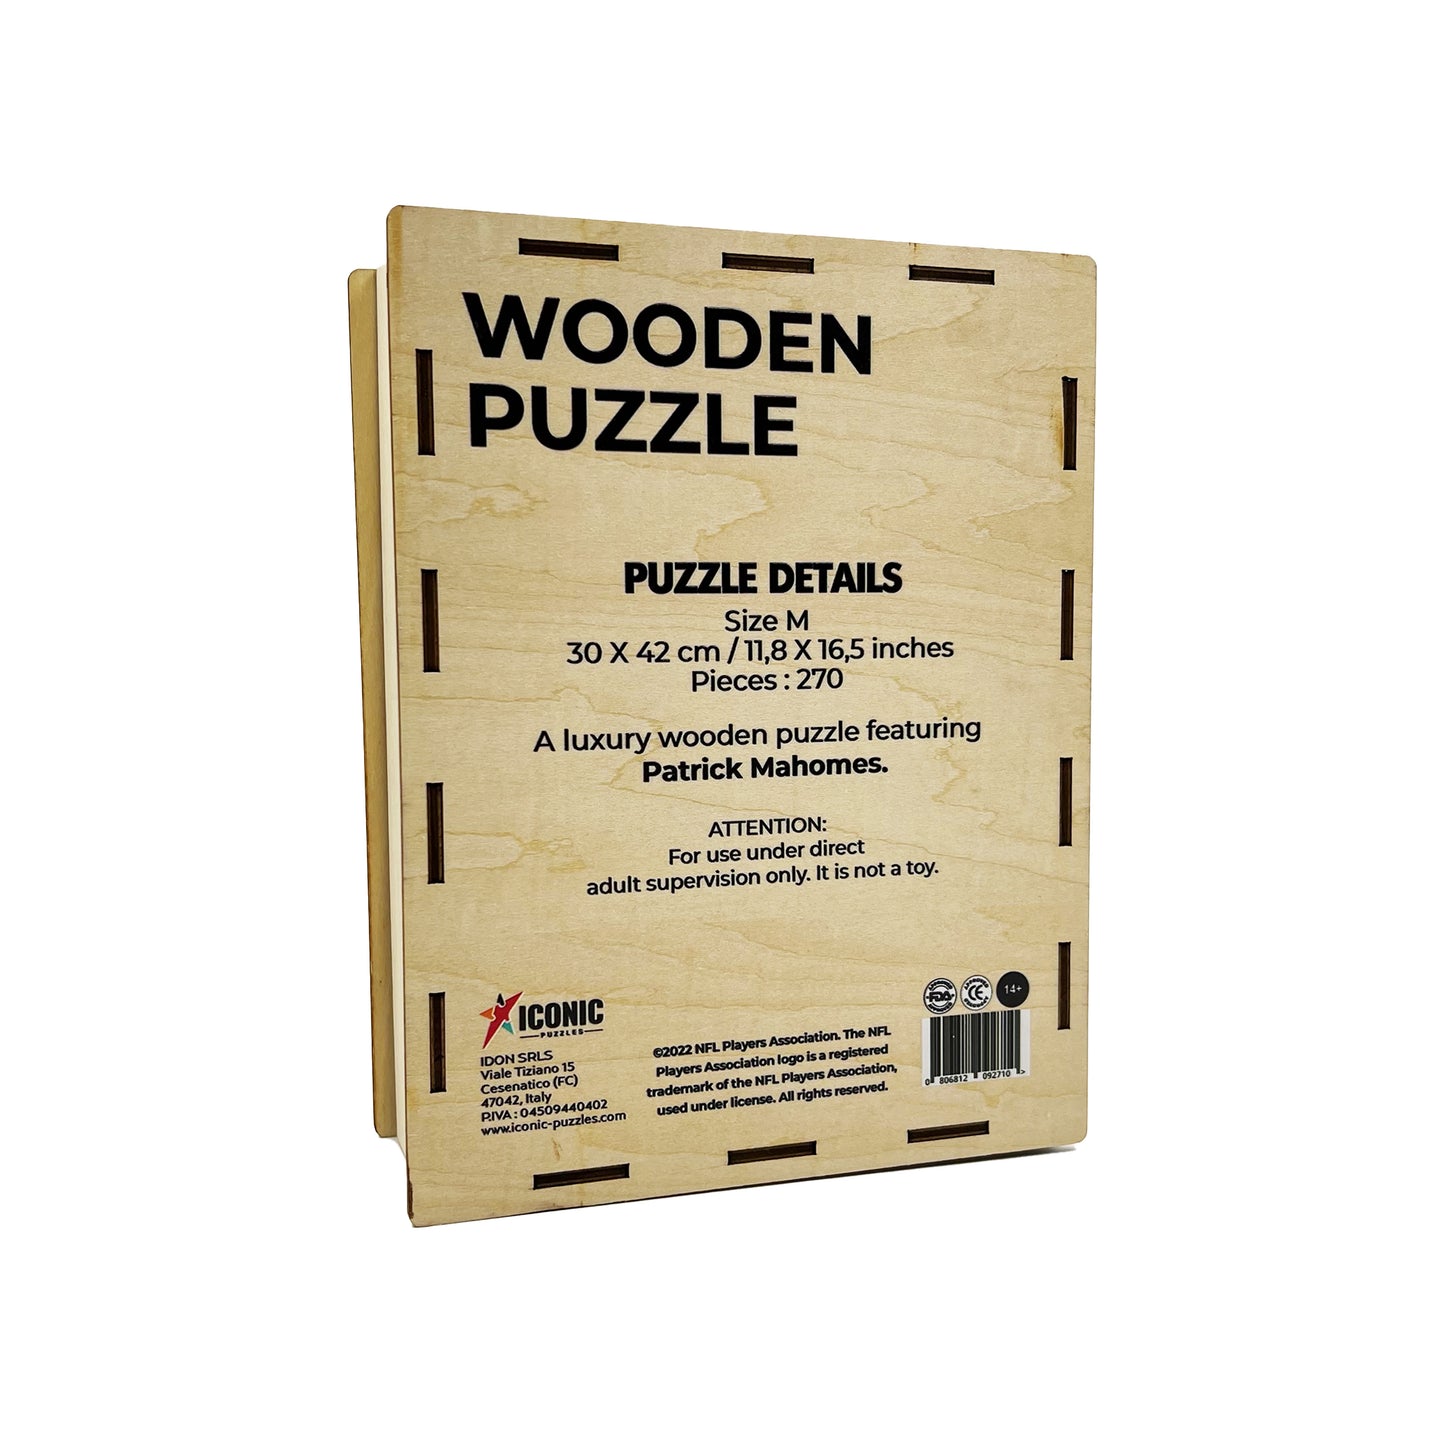 Aaron Rodgers - Wooden Puzzle